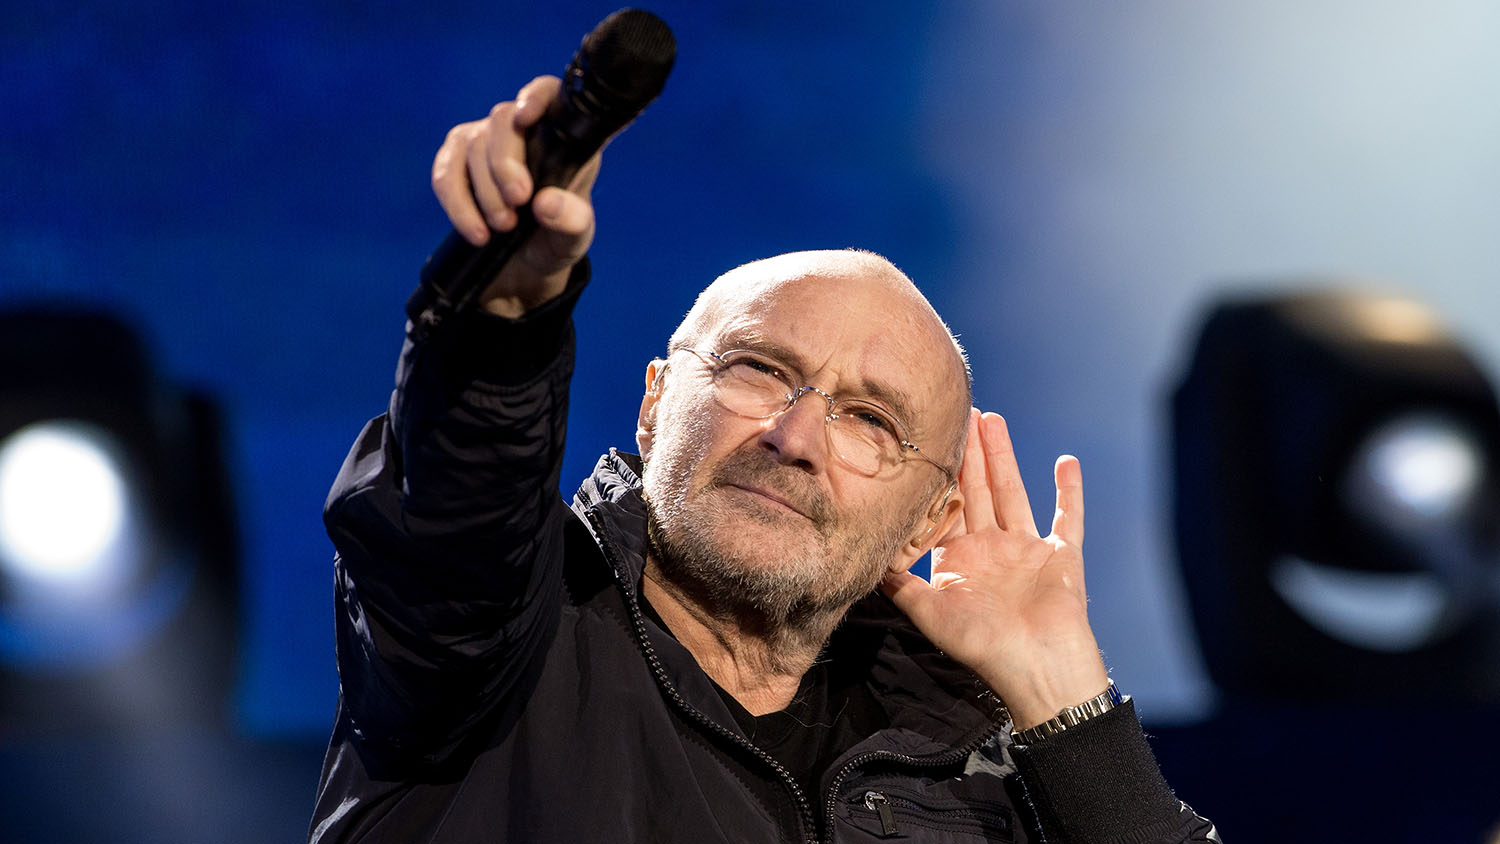 Phil Collins: Everything you need to know about the musician